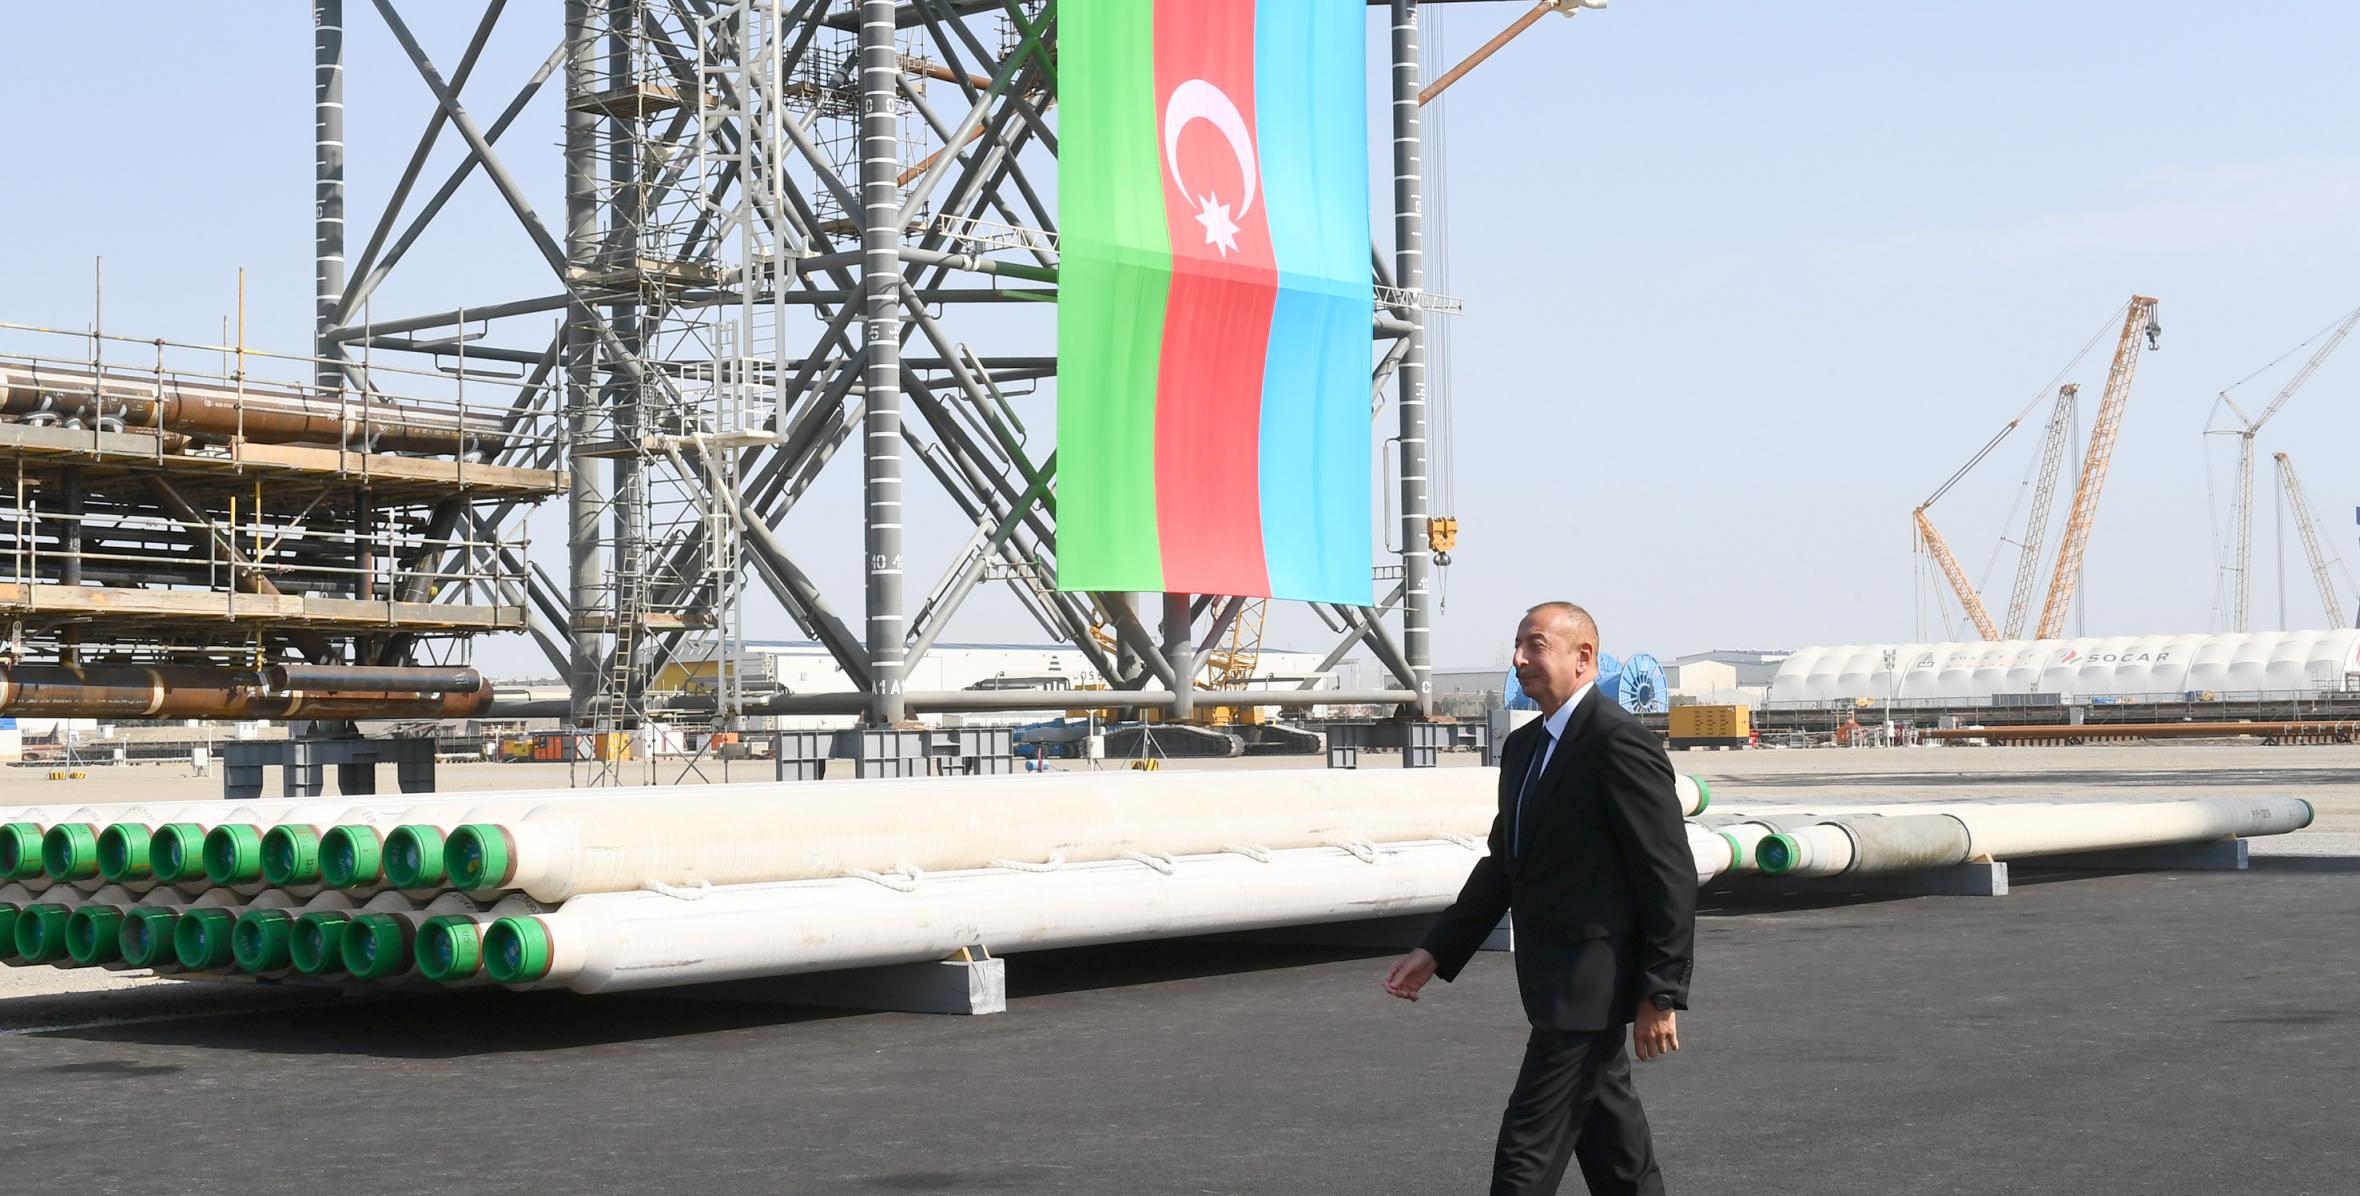 Ilham Aliyev attended the Absheron EPS Project Marine Works Opening Ceremony